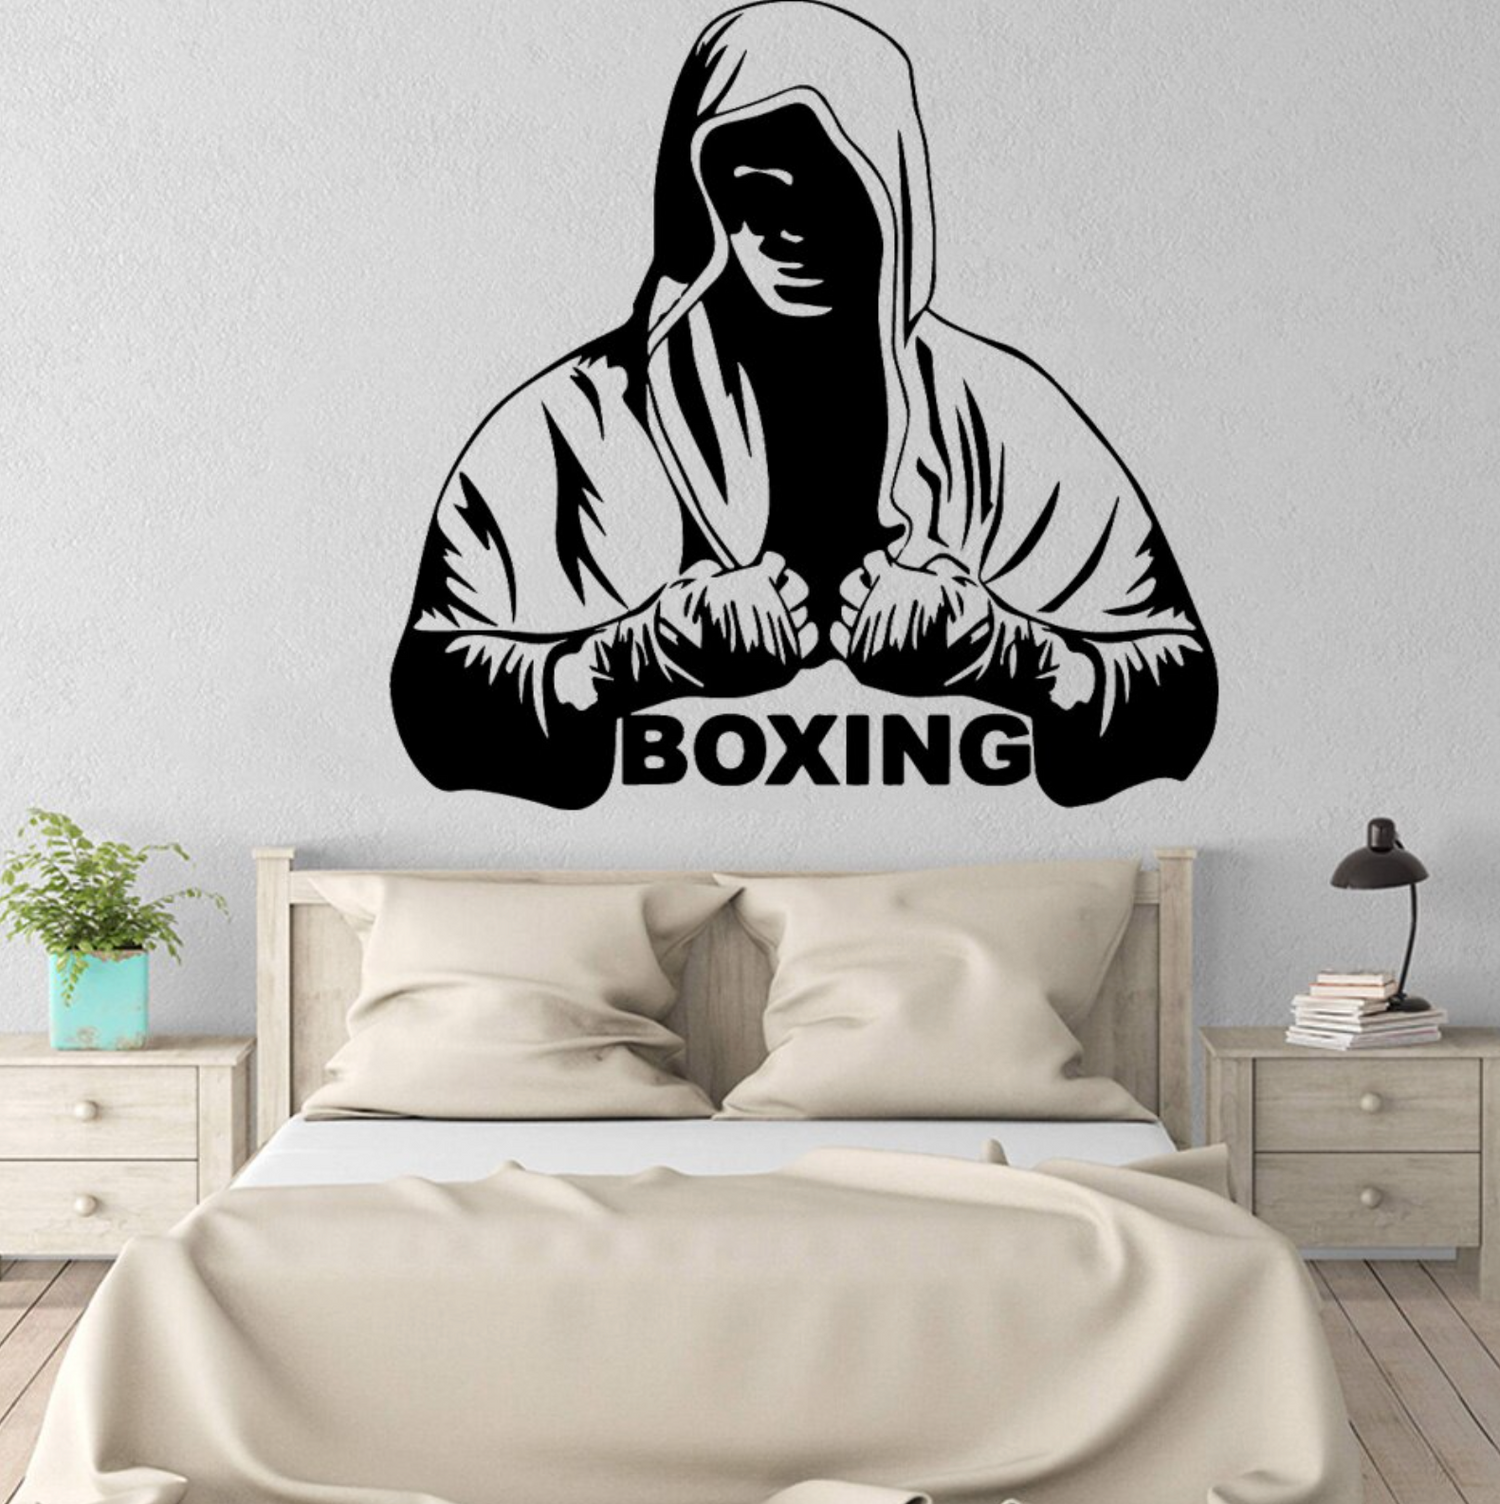 BOXING STICKERS